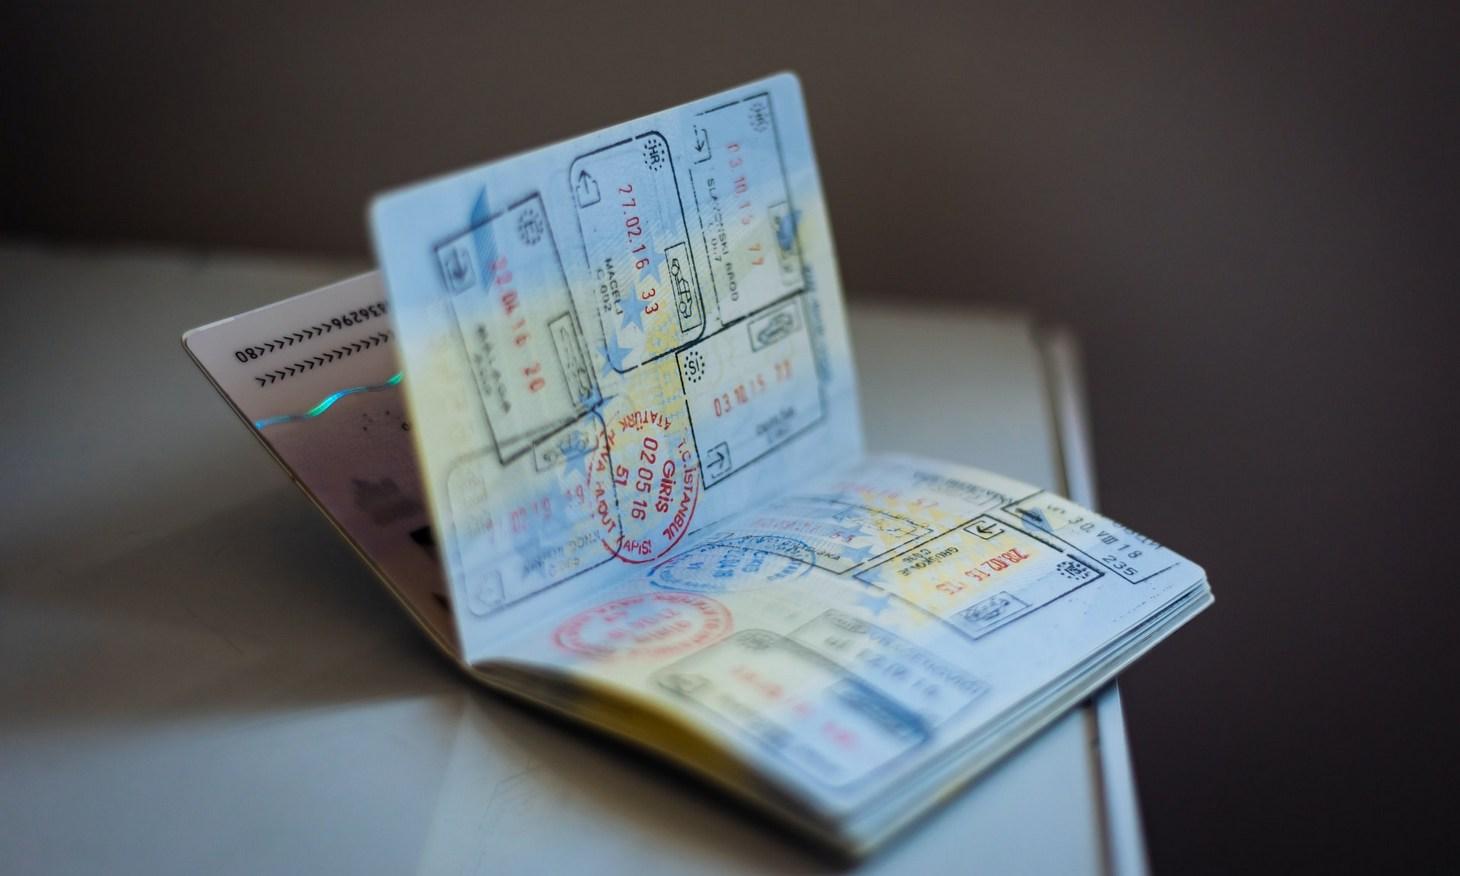 biographic page of your passport